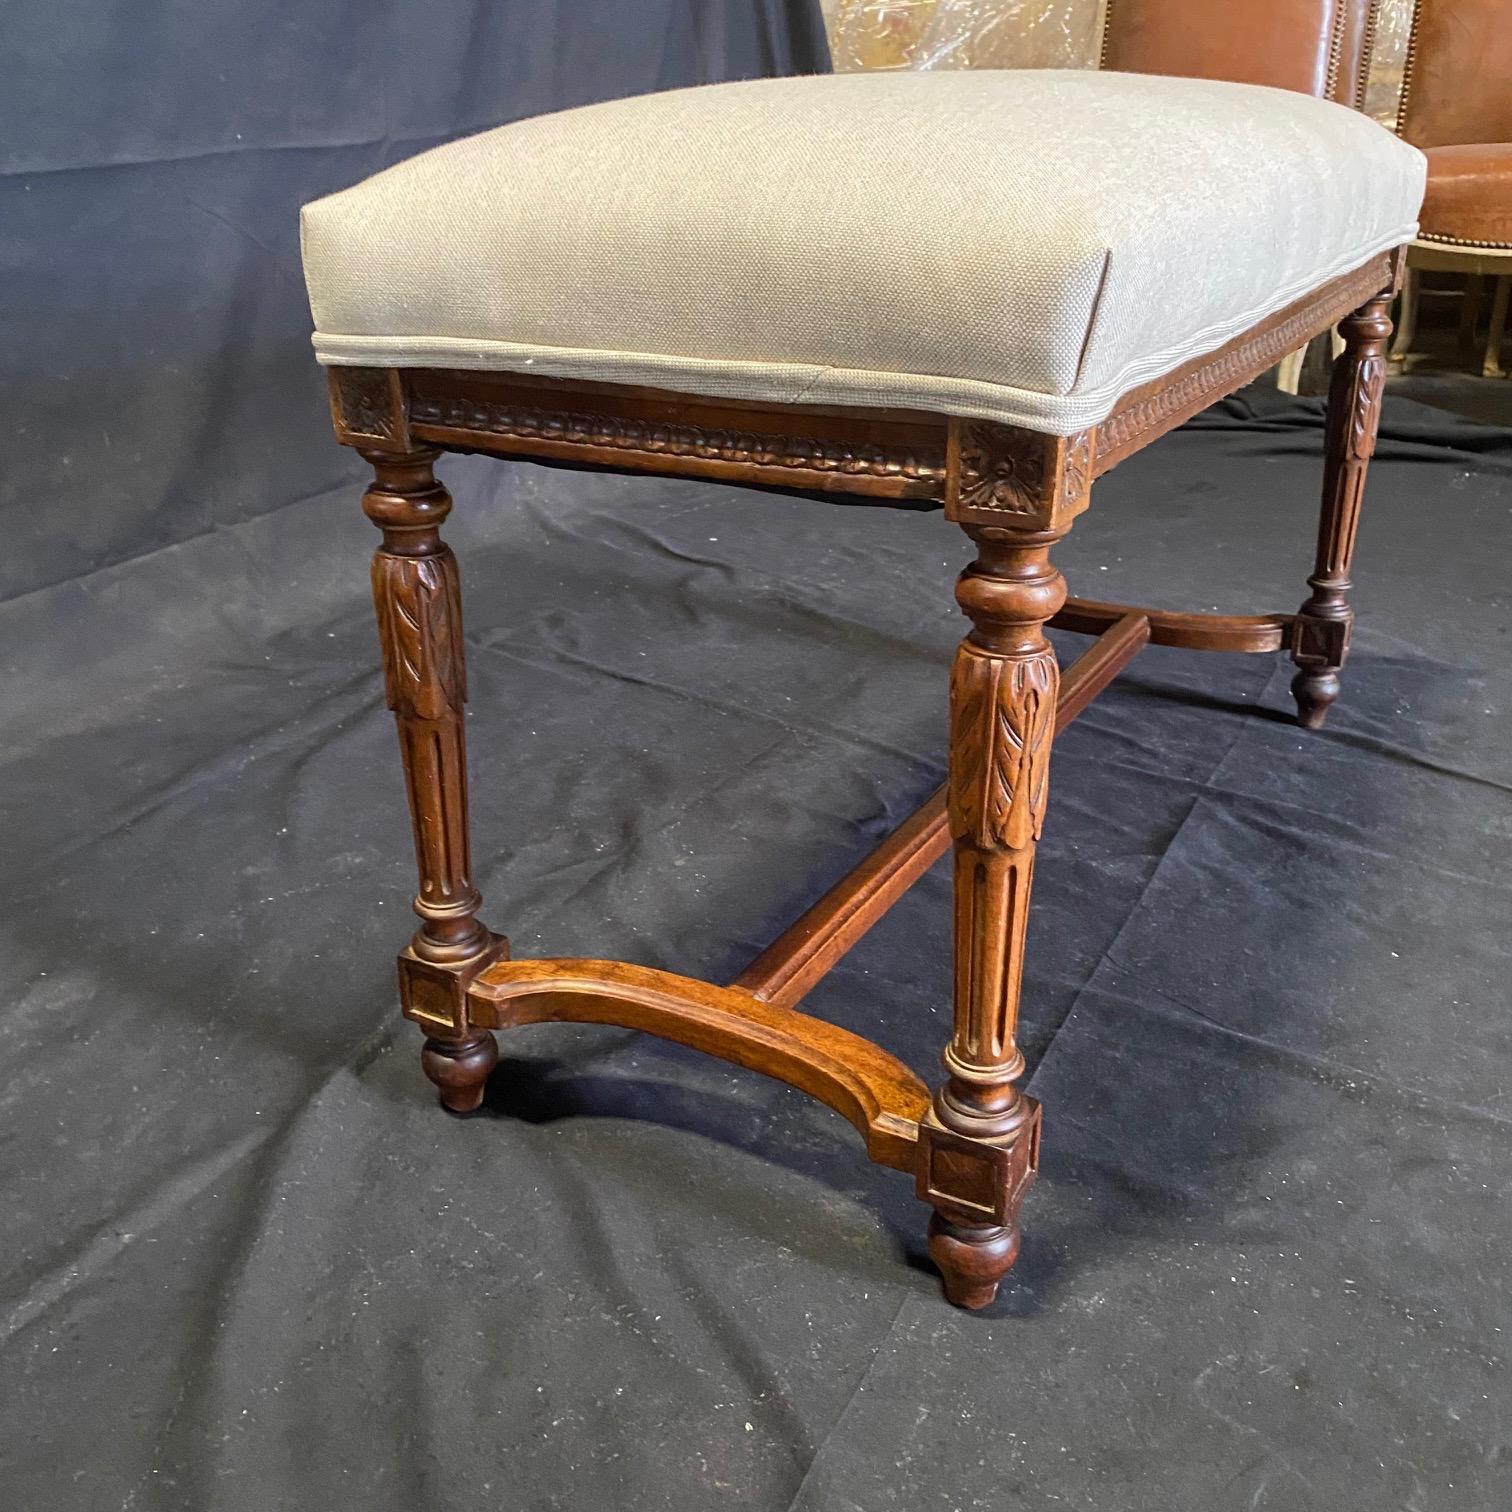 A beautiful and high quality French walnut Louis XVI bench raised by elegant fluted baluster shaped legs with exceptionally carved acanthus leaf designs and shaped foliate feet below fluted block reserves each connected by a most decorative curved